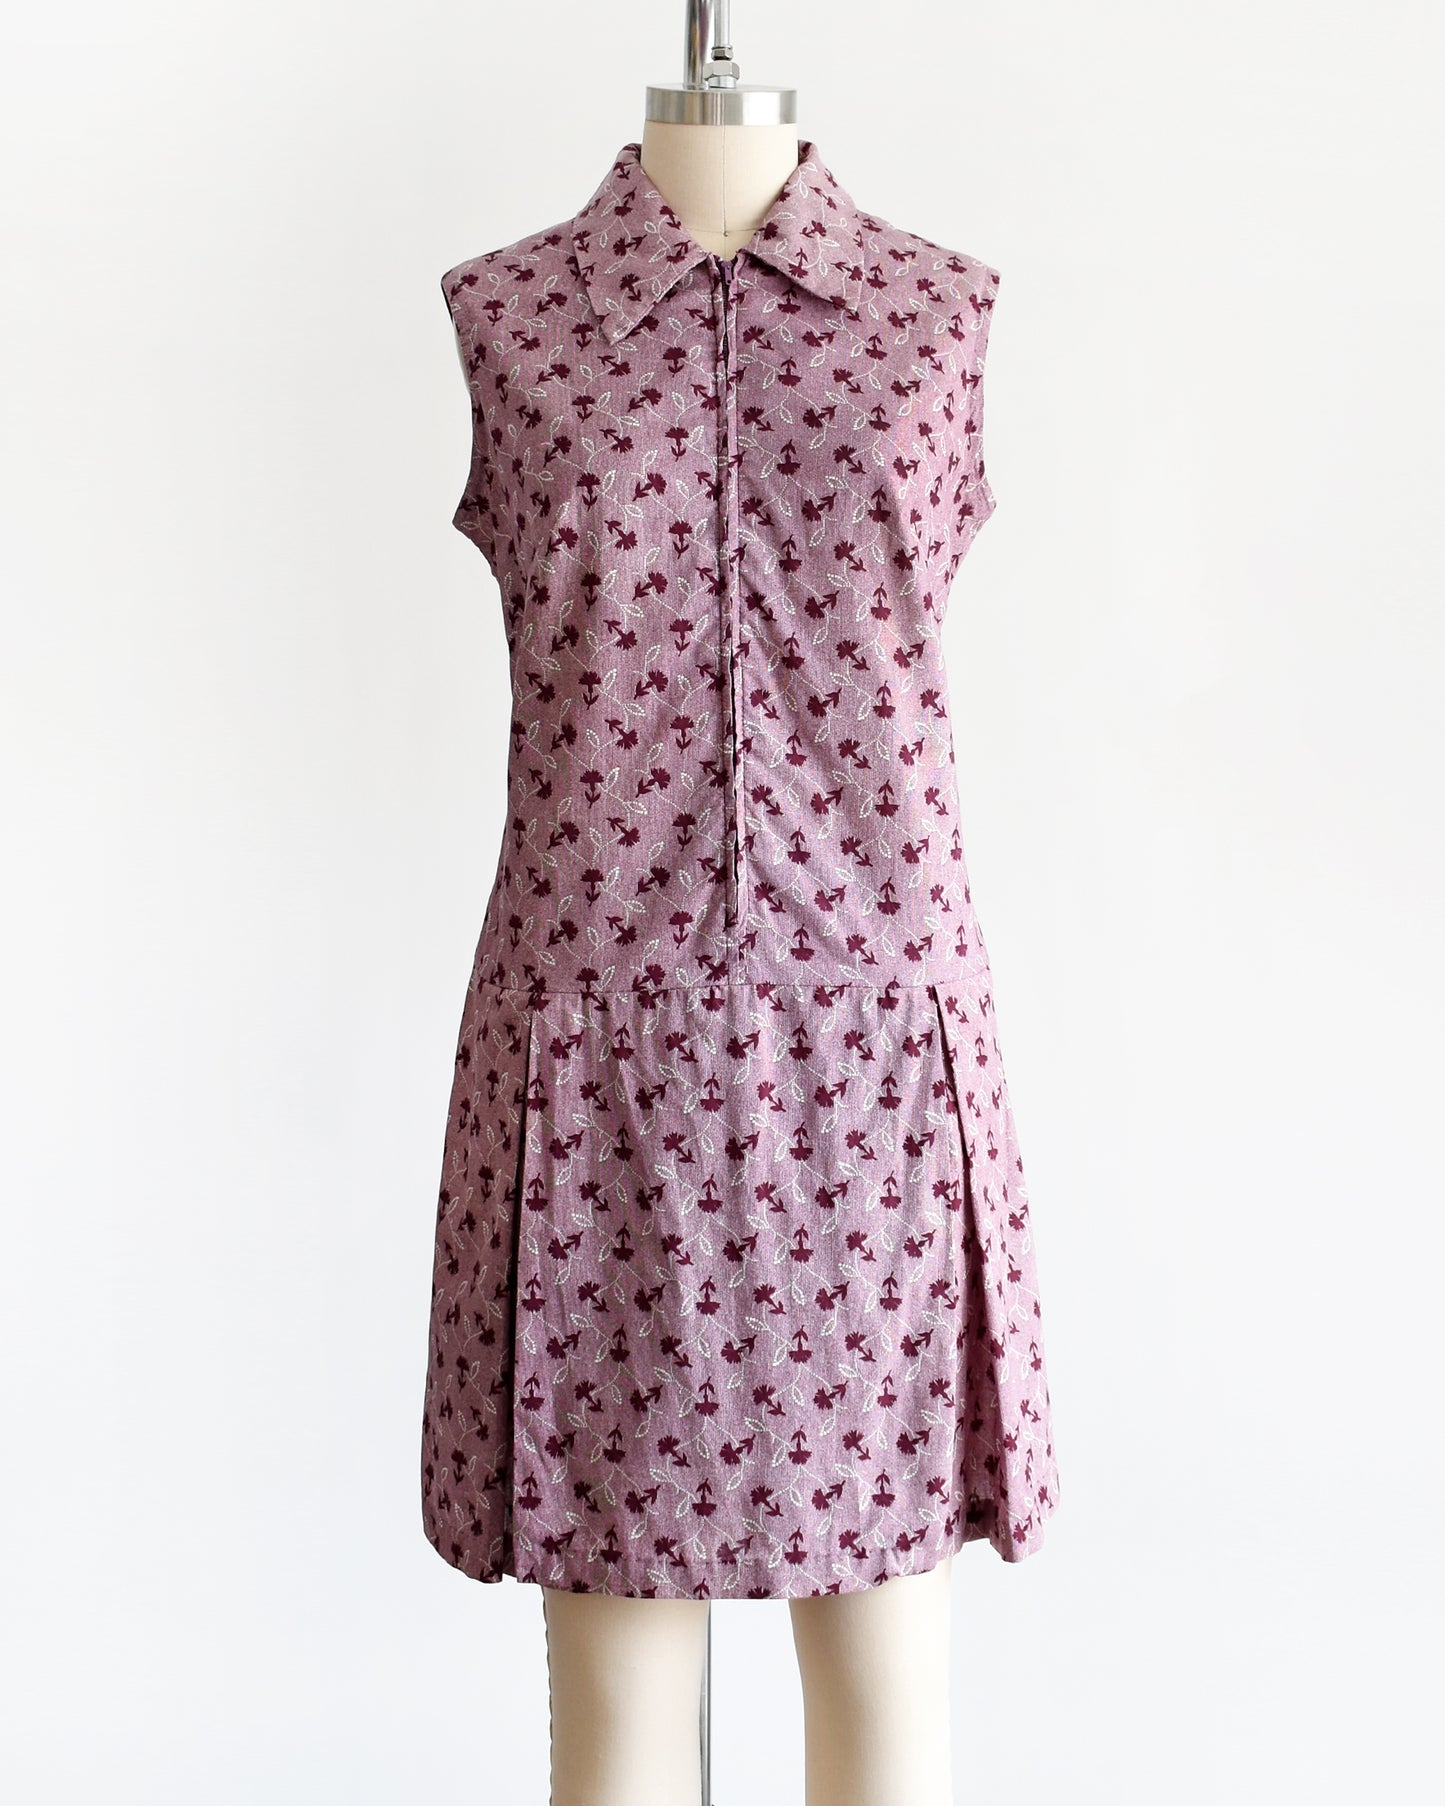 This 1970s vintage romper features a cute purple and white floral print, a collared neckline, and a metal zipper closure down the front. 